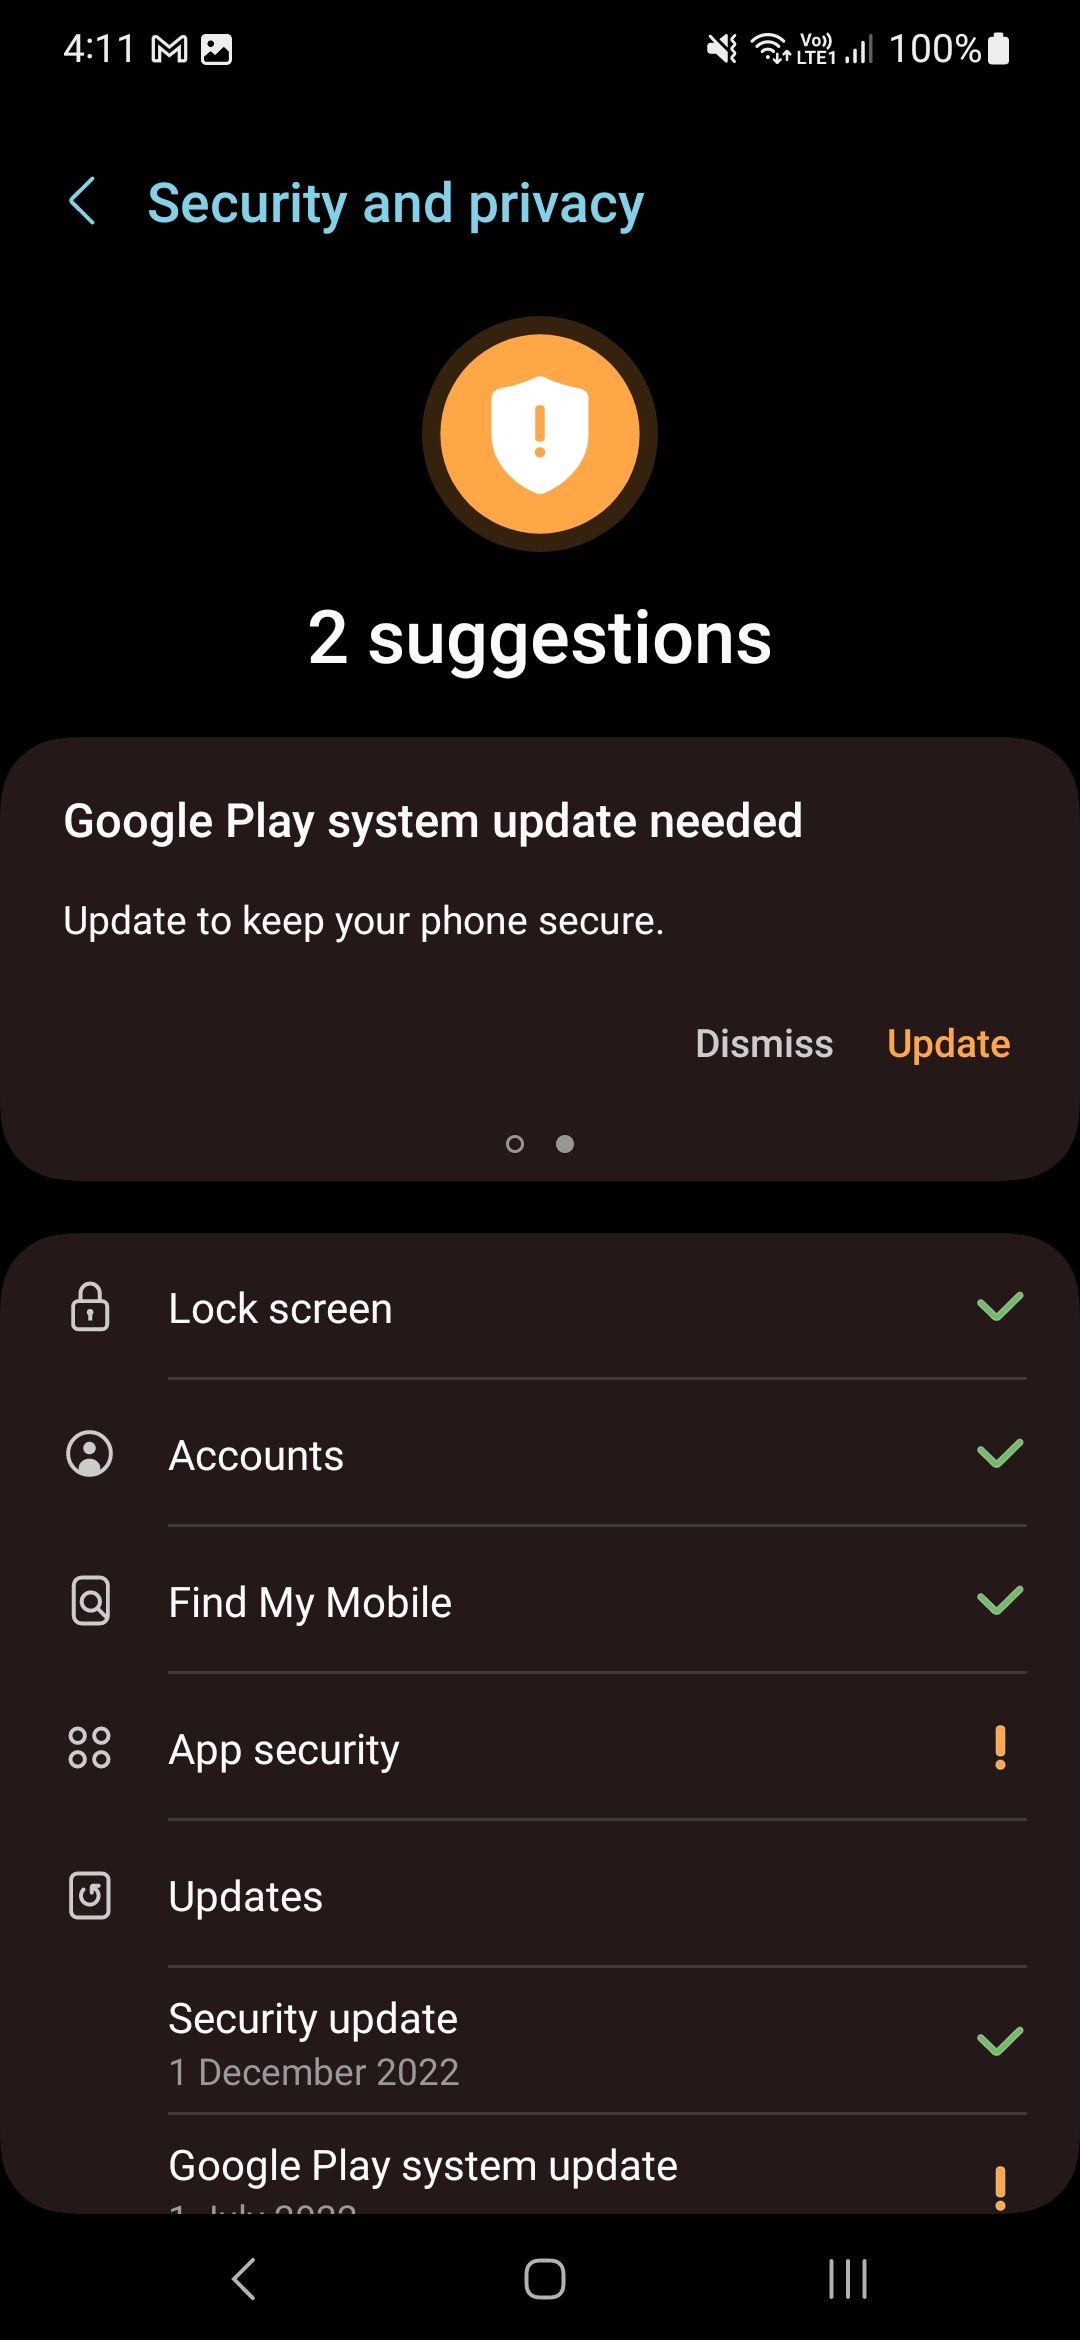 Google Play system update prompt